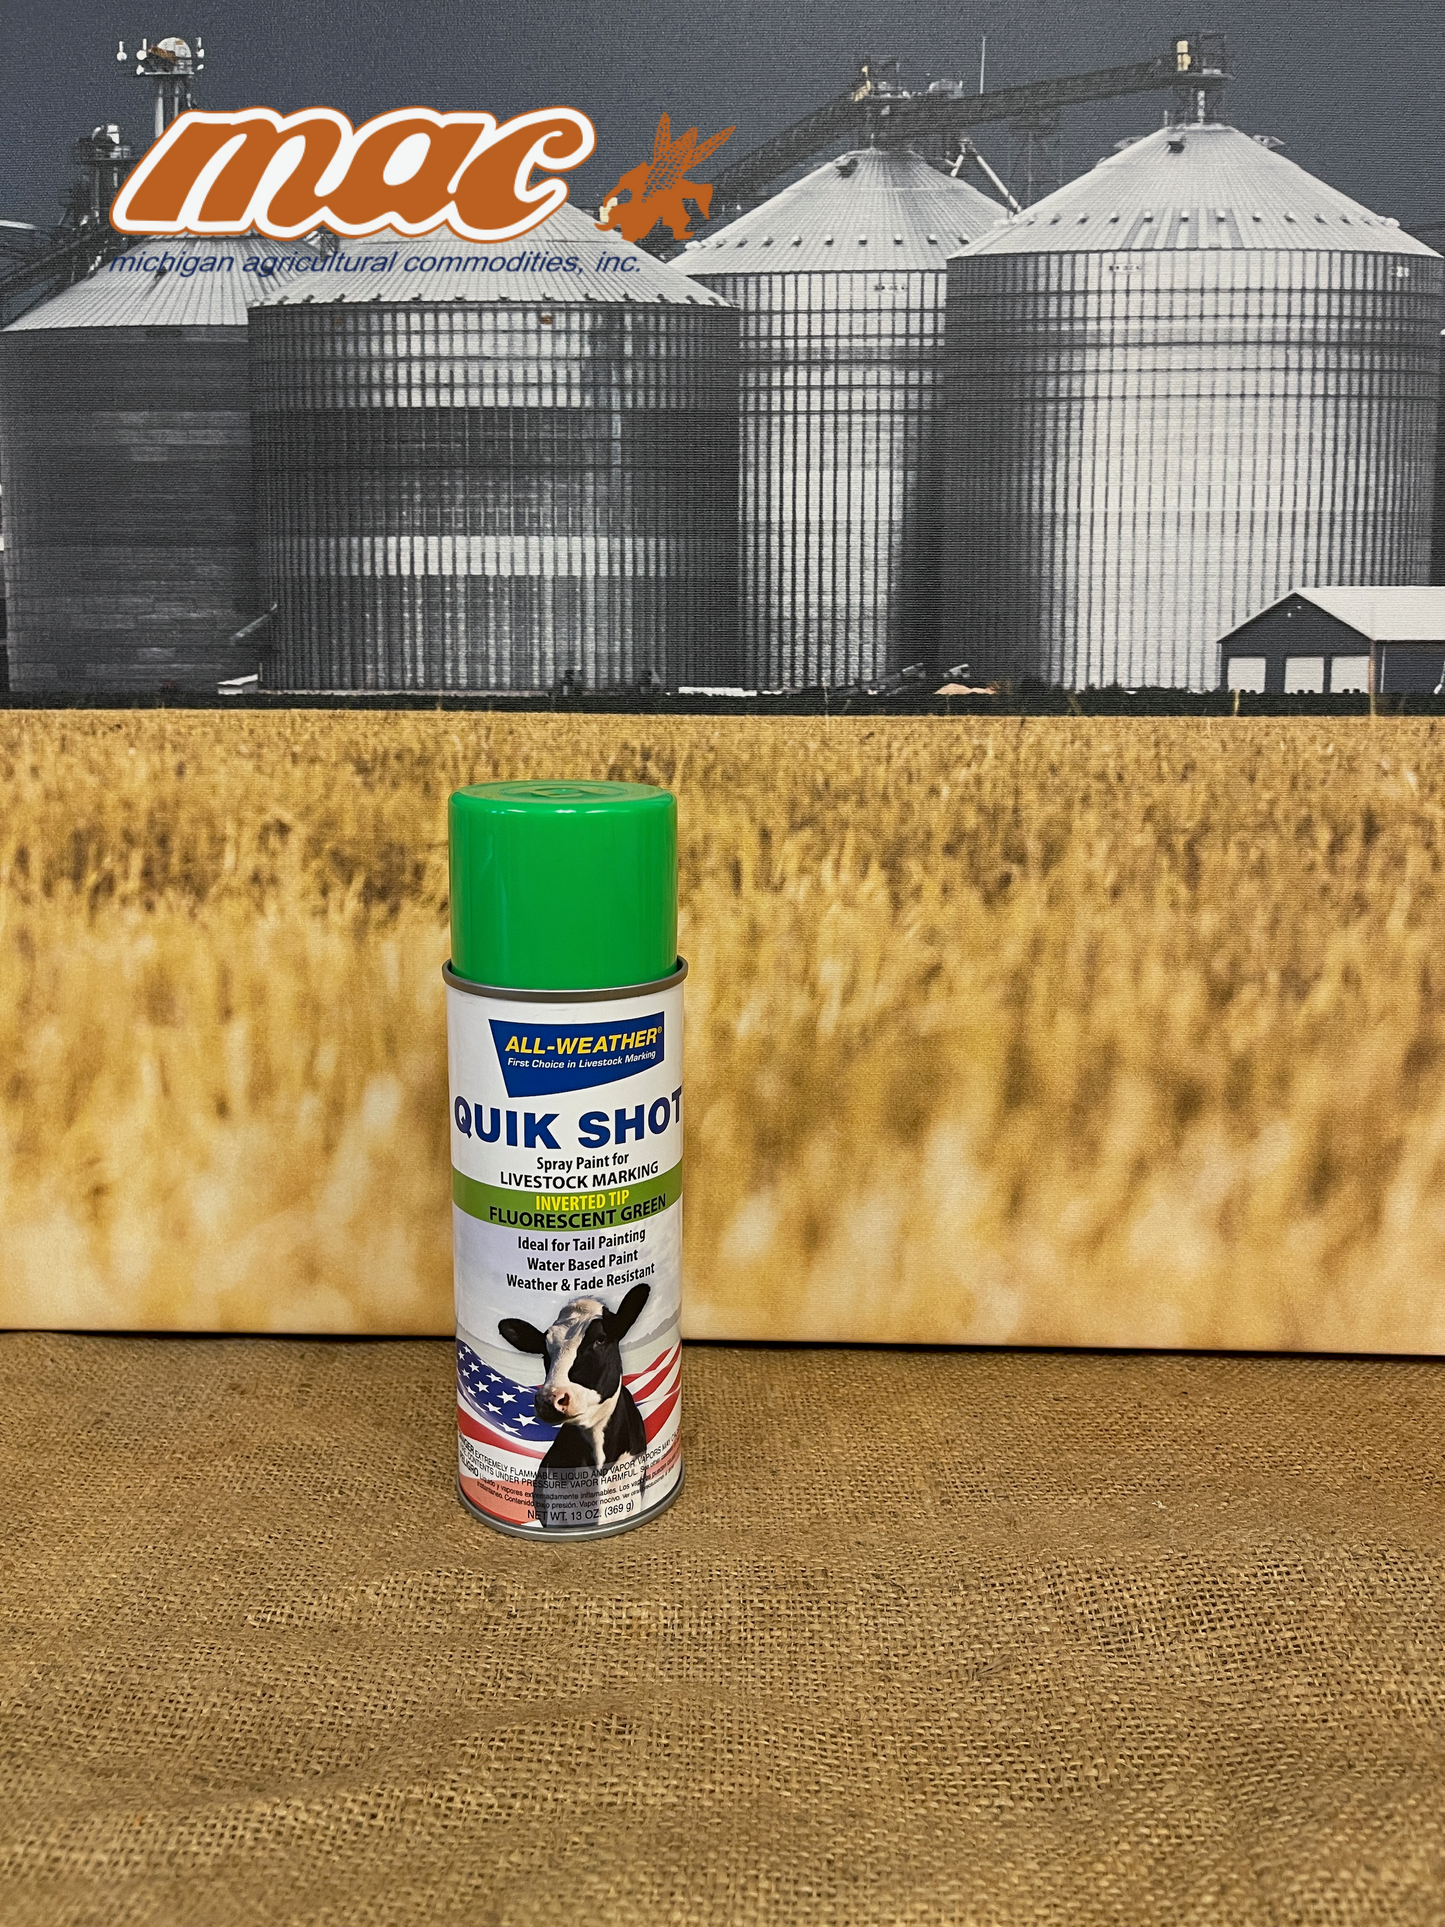 All-Weather Quik Shot Spray Paint